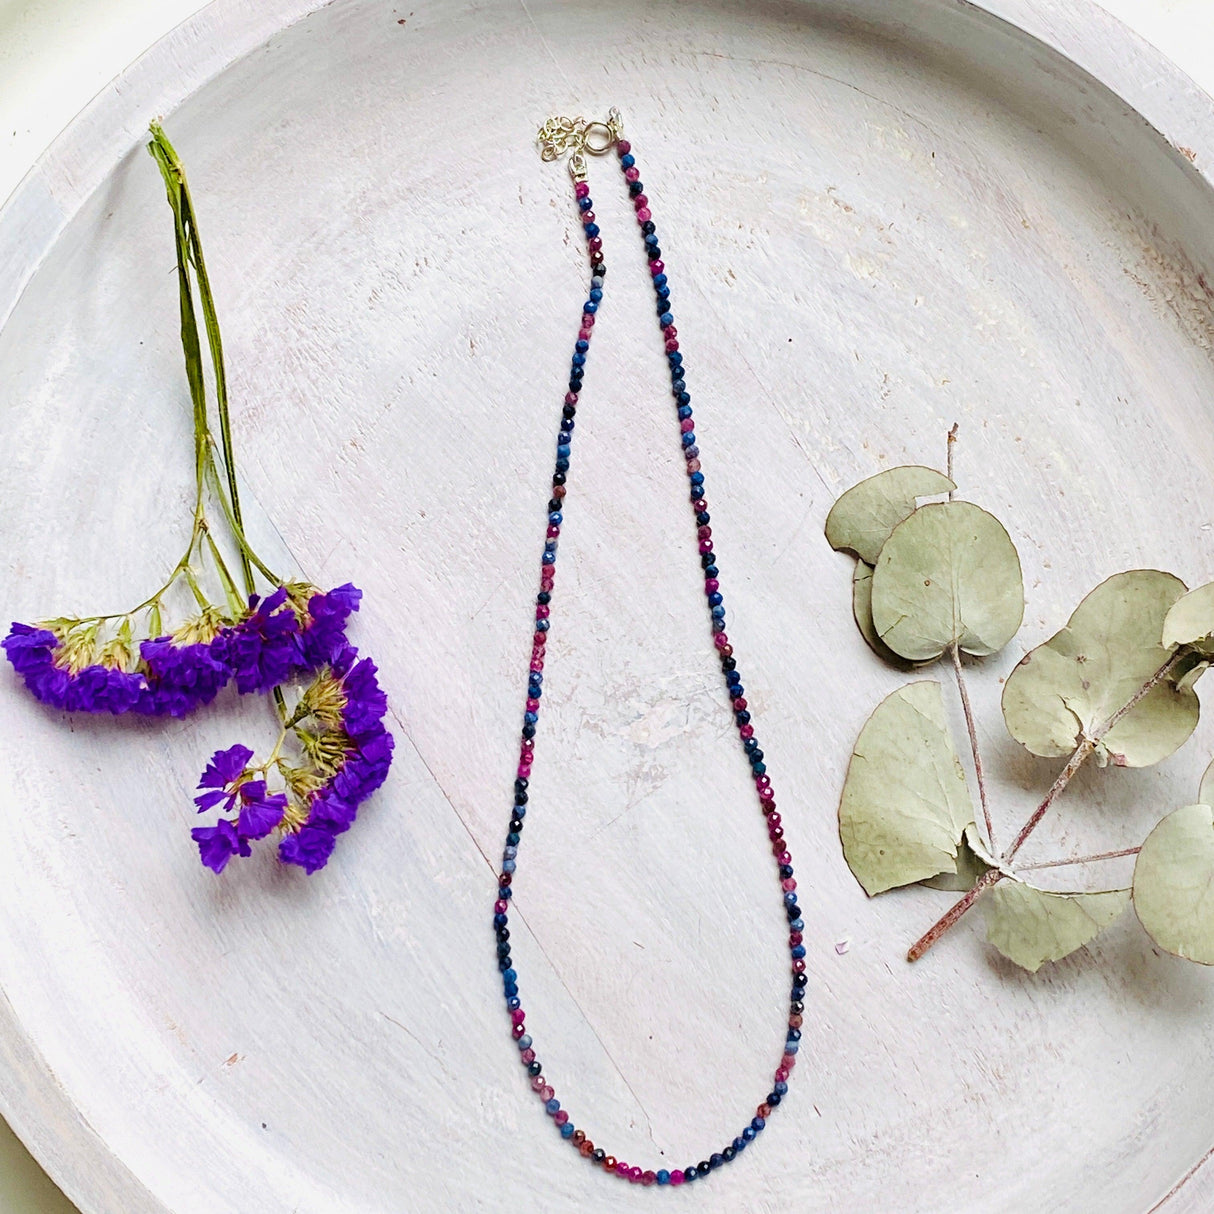 Micro Bead Necklace - Ruby and Sapphire - Nature's Magick